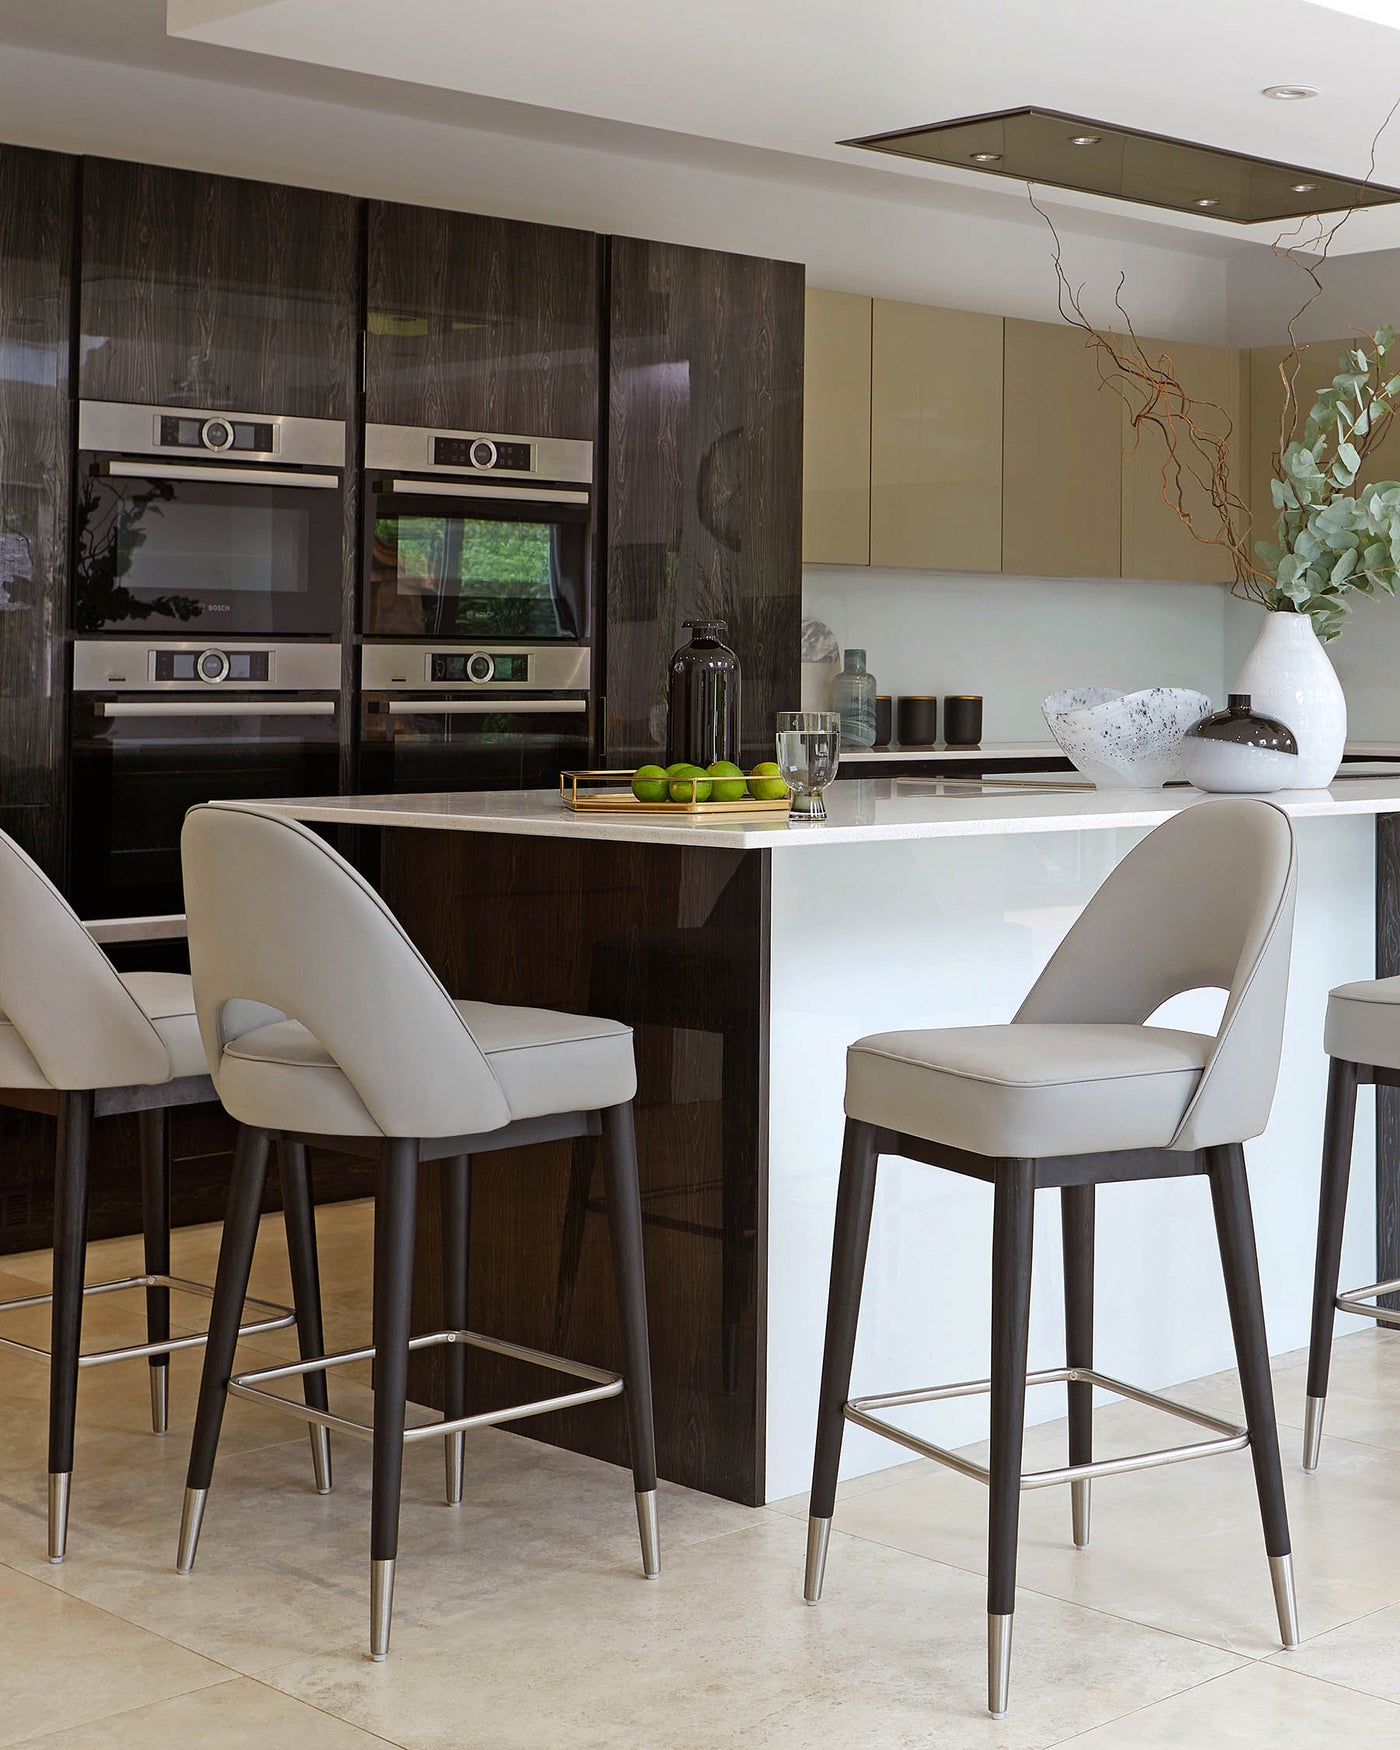 Elegant modern kitchen bar stools with dark wooden legs and sleek grey upholstery, enhanced by metallic footrests and positioned around a white kitchen island.